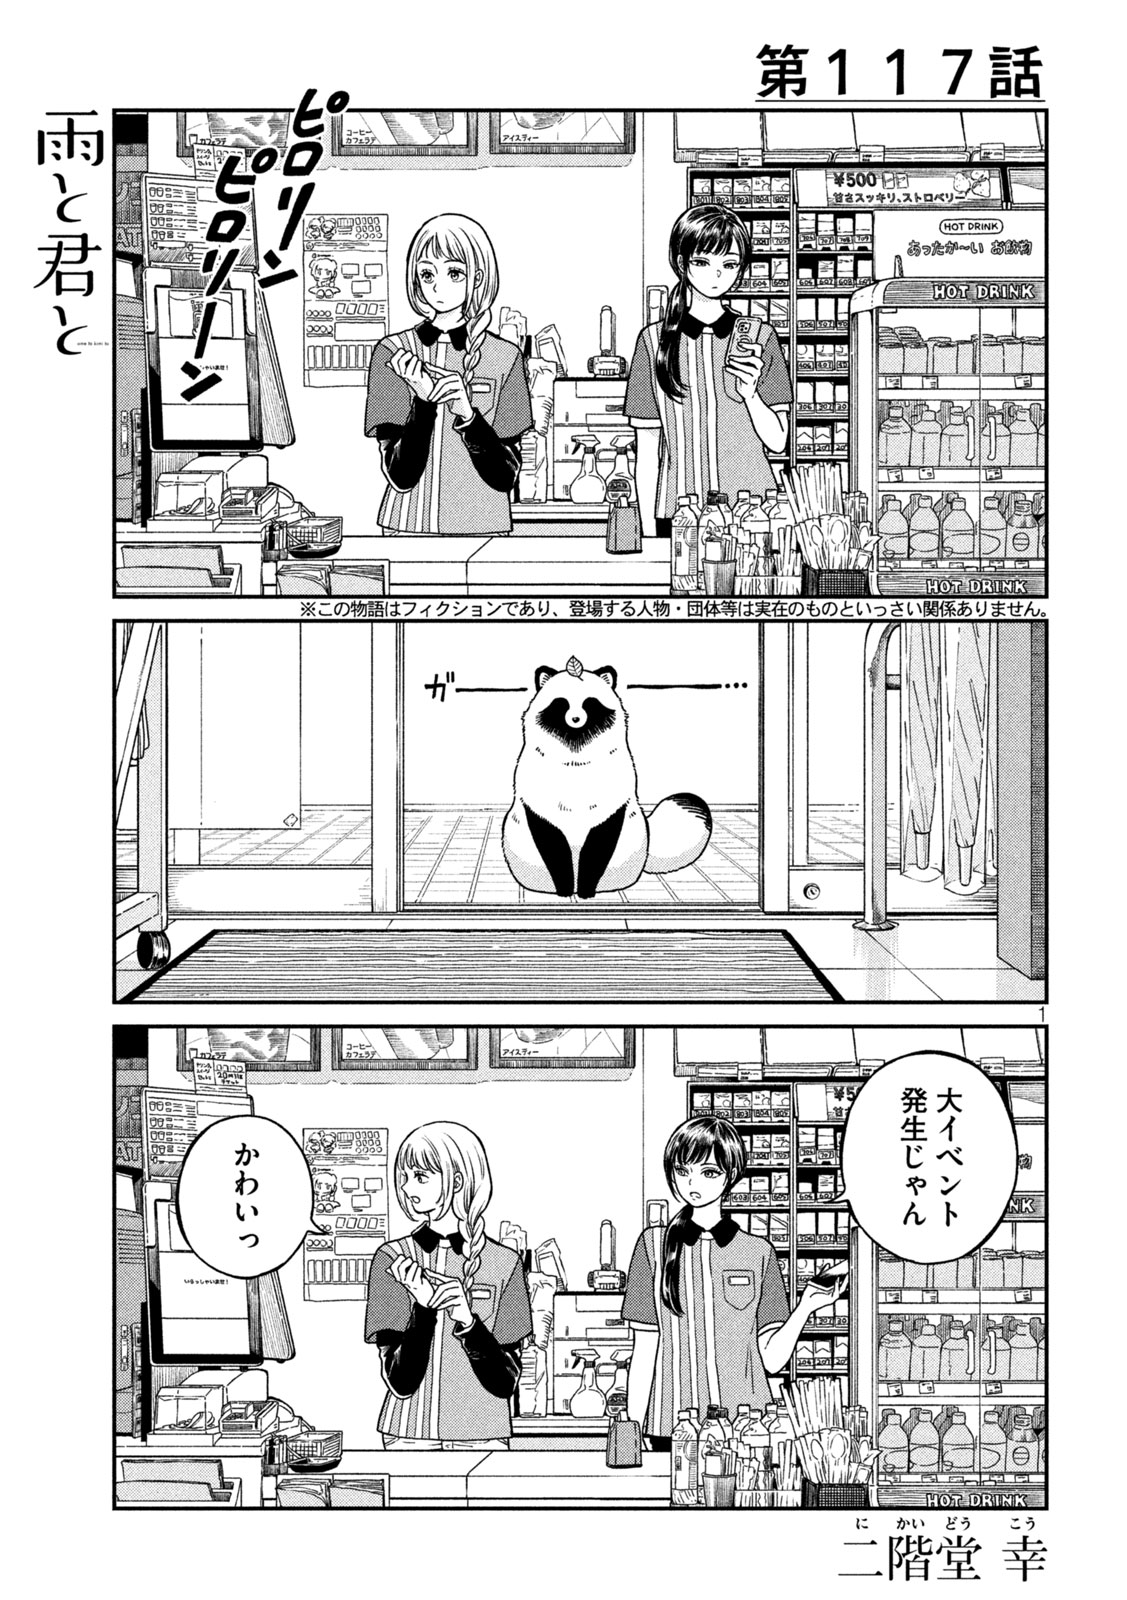 Ame to Kimi to - Chapter 117 - Page 1